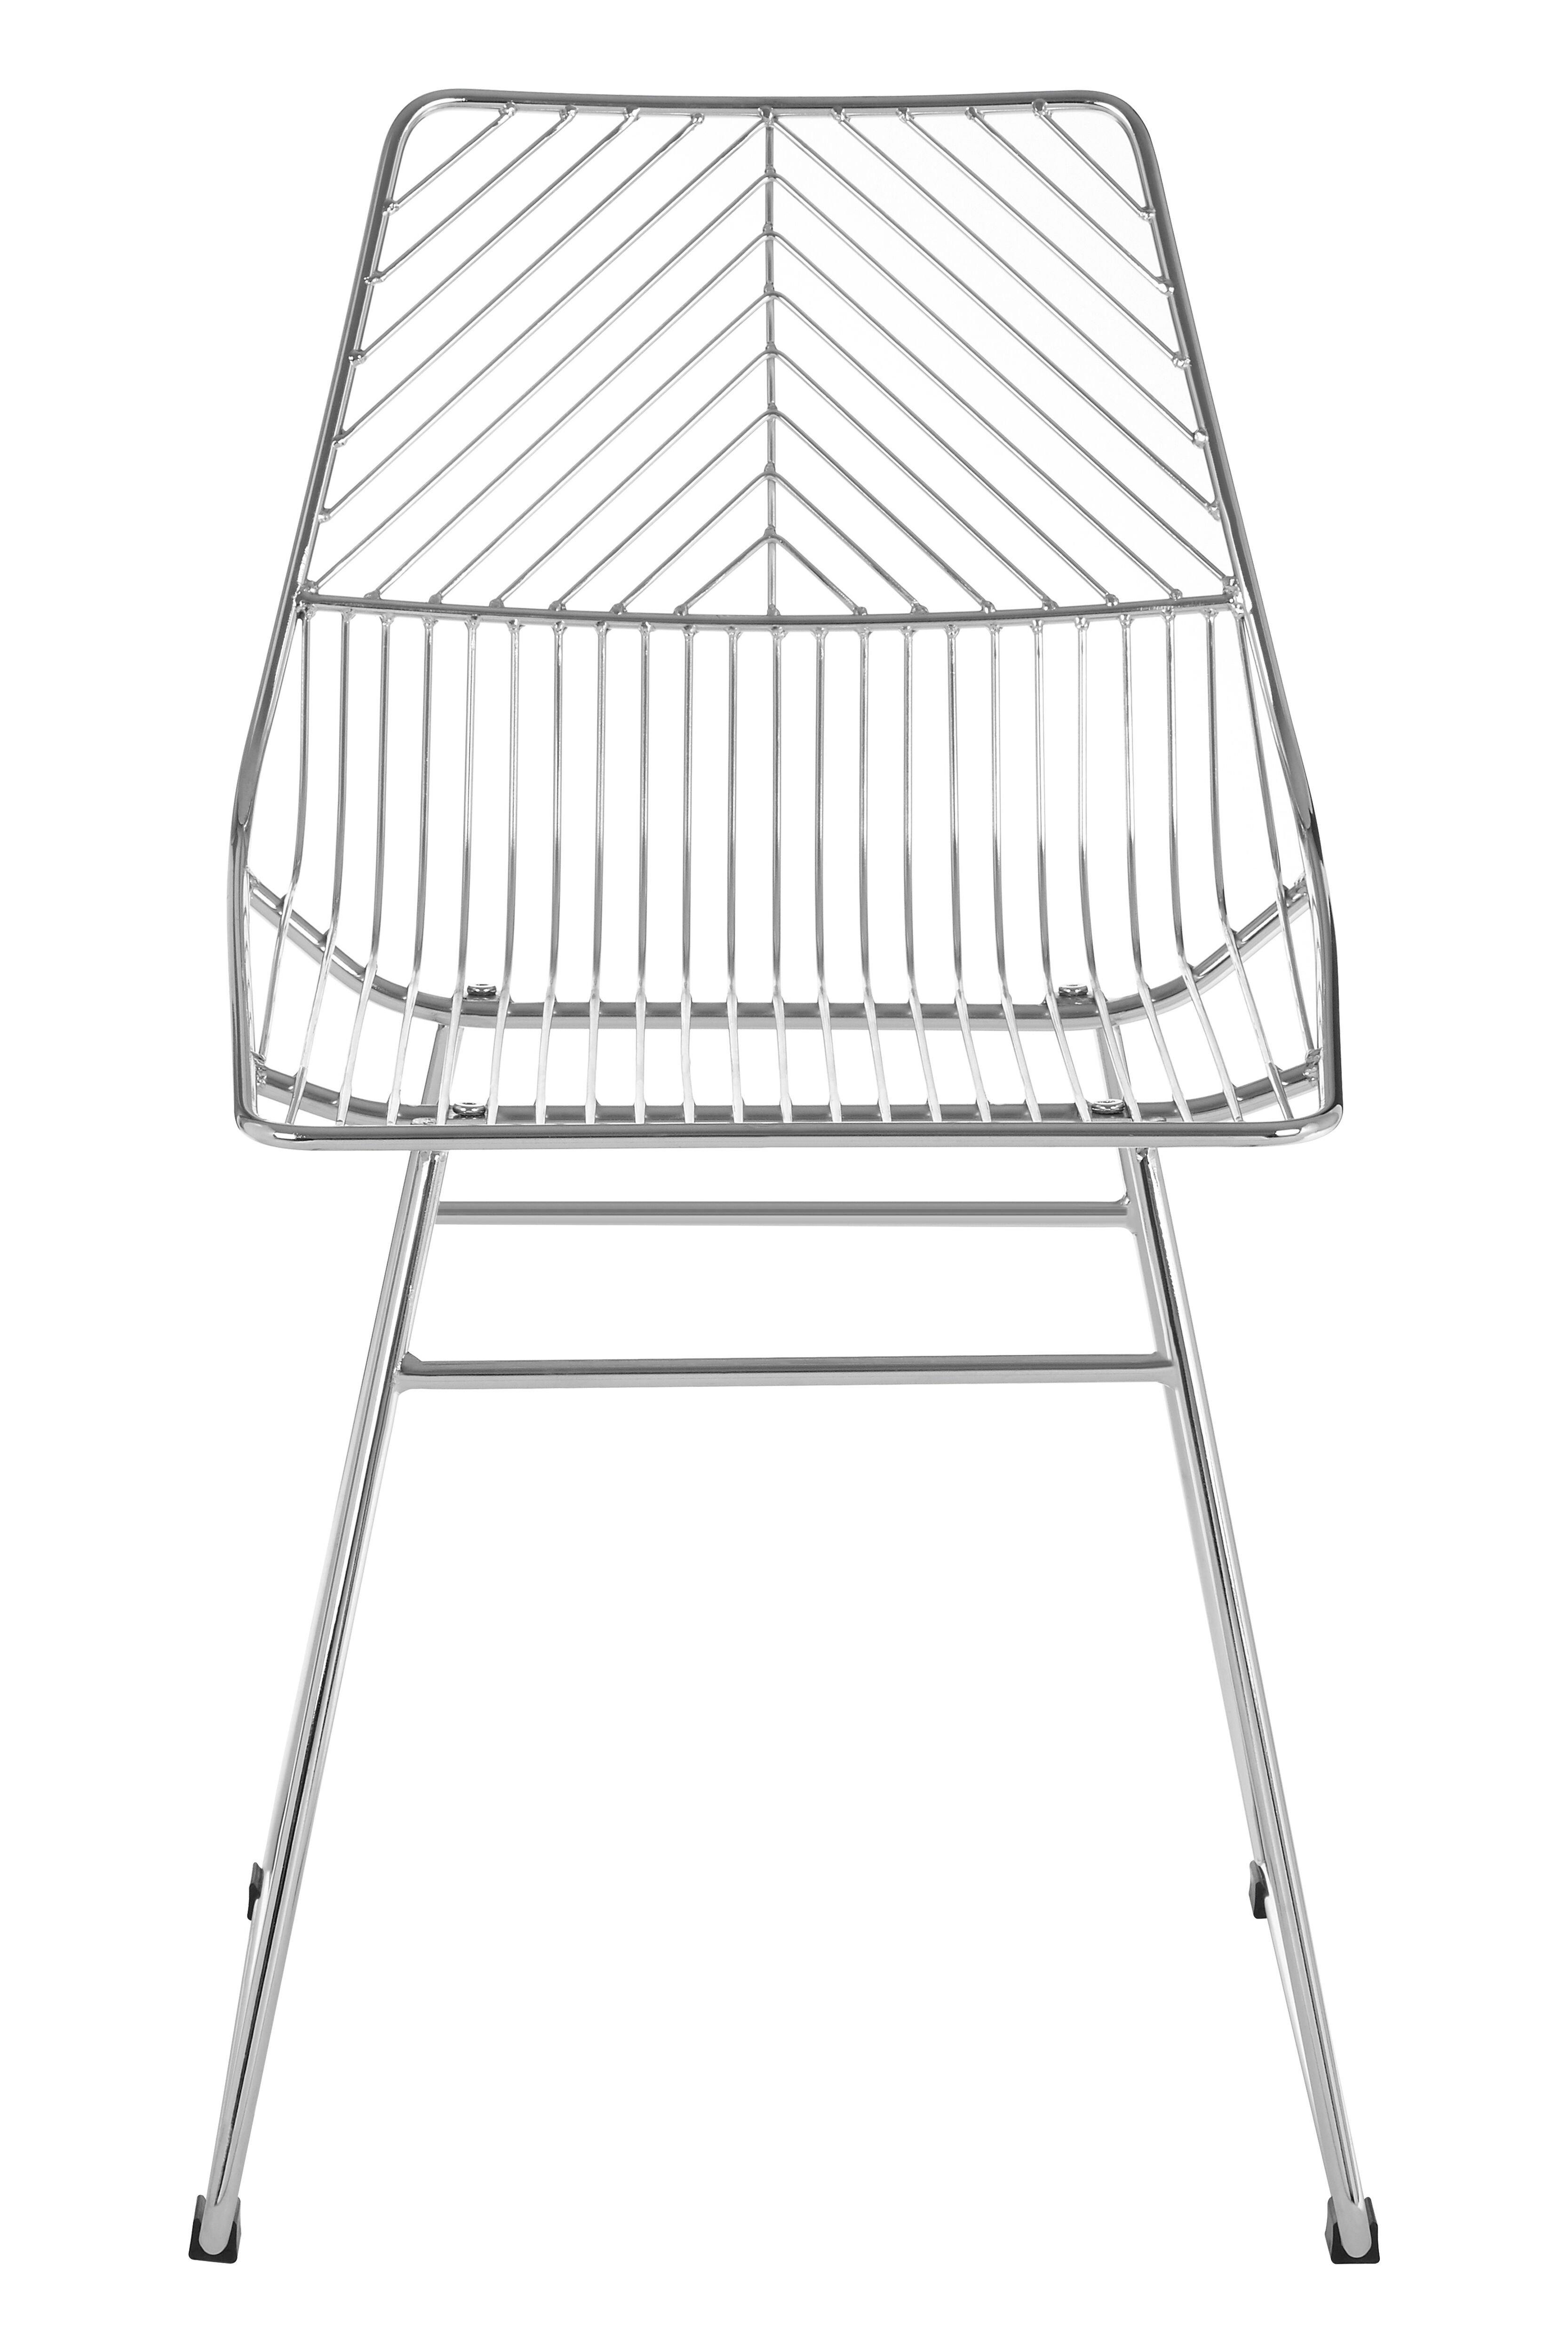 Small Chrome Metal Wire Chair, Outdoor Tapered Metal Chair for Patio